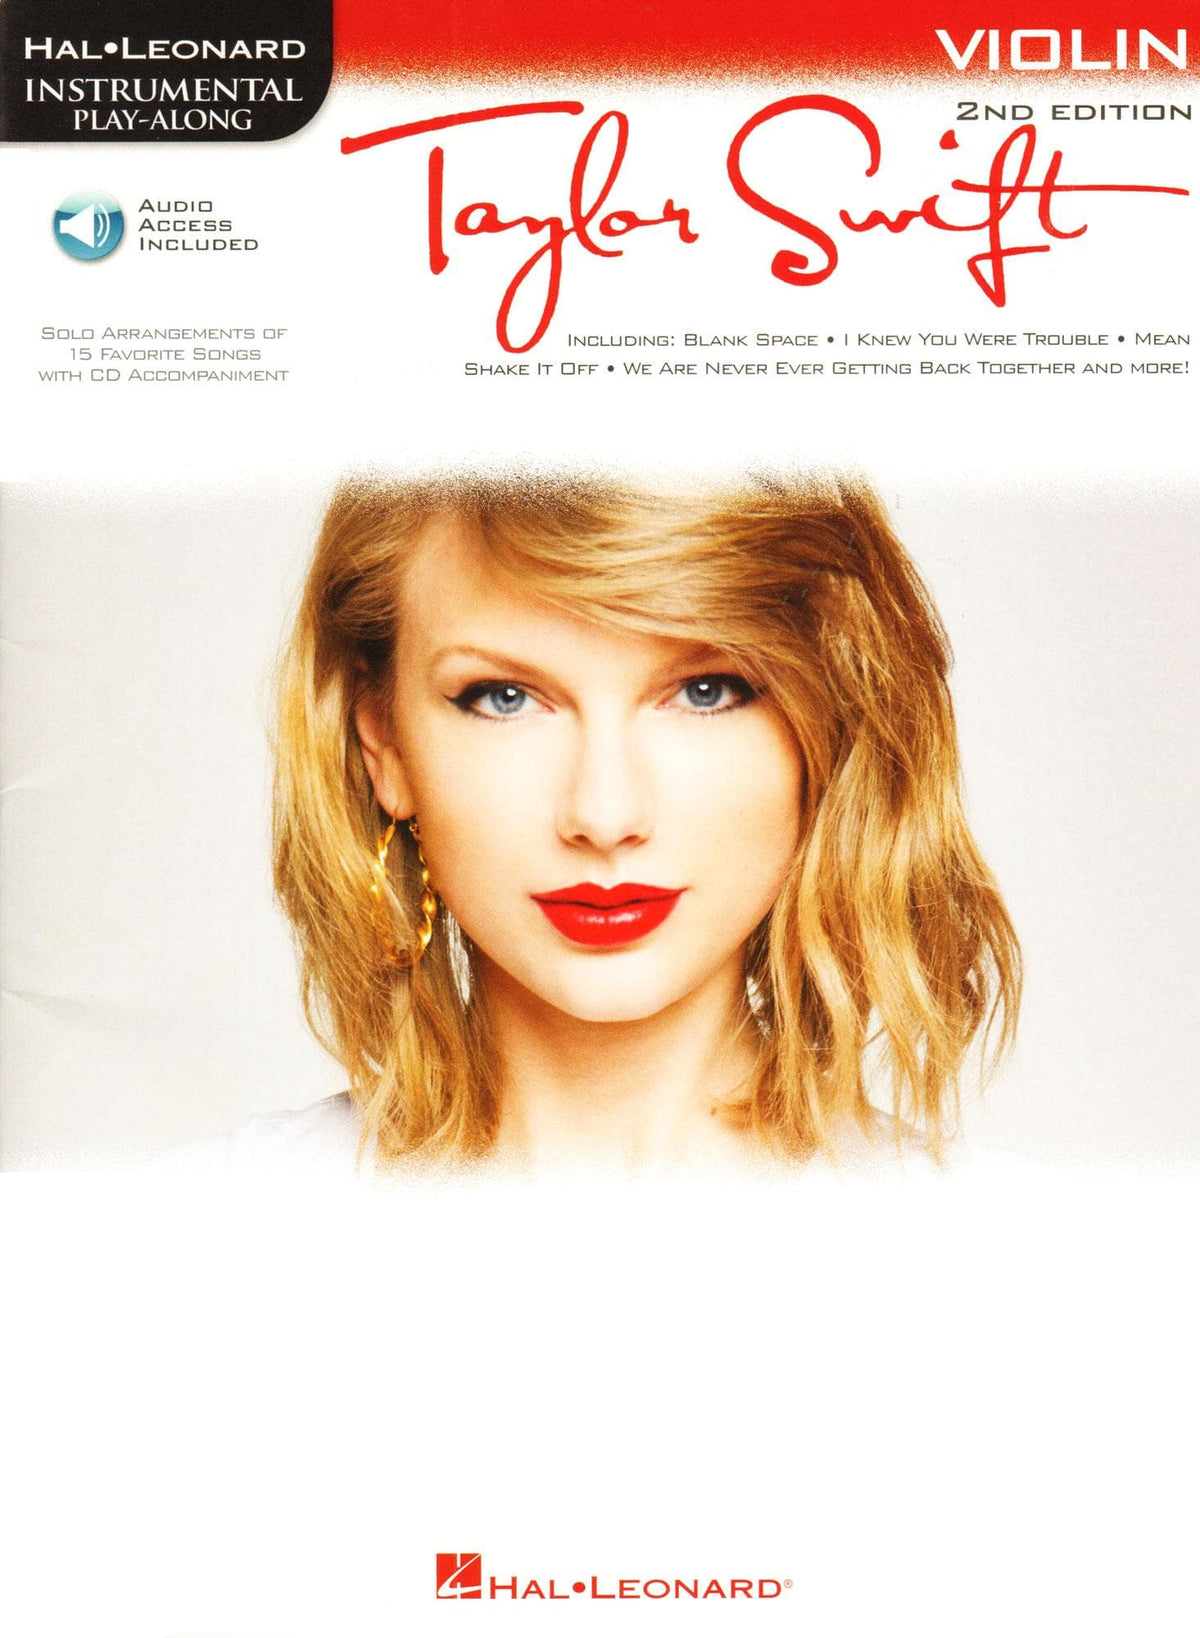 Taylor Swift Instrumental Play-Along - 2nd Edition - for Violin with Audio Accompaniment - Hal Leonard